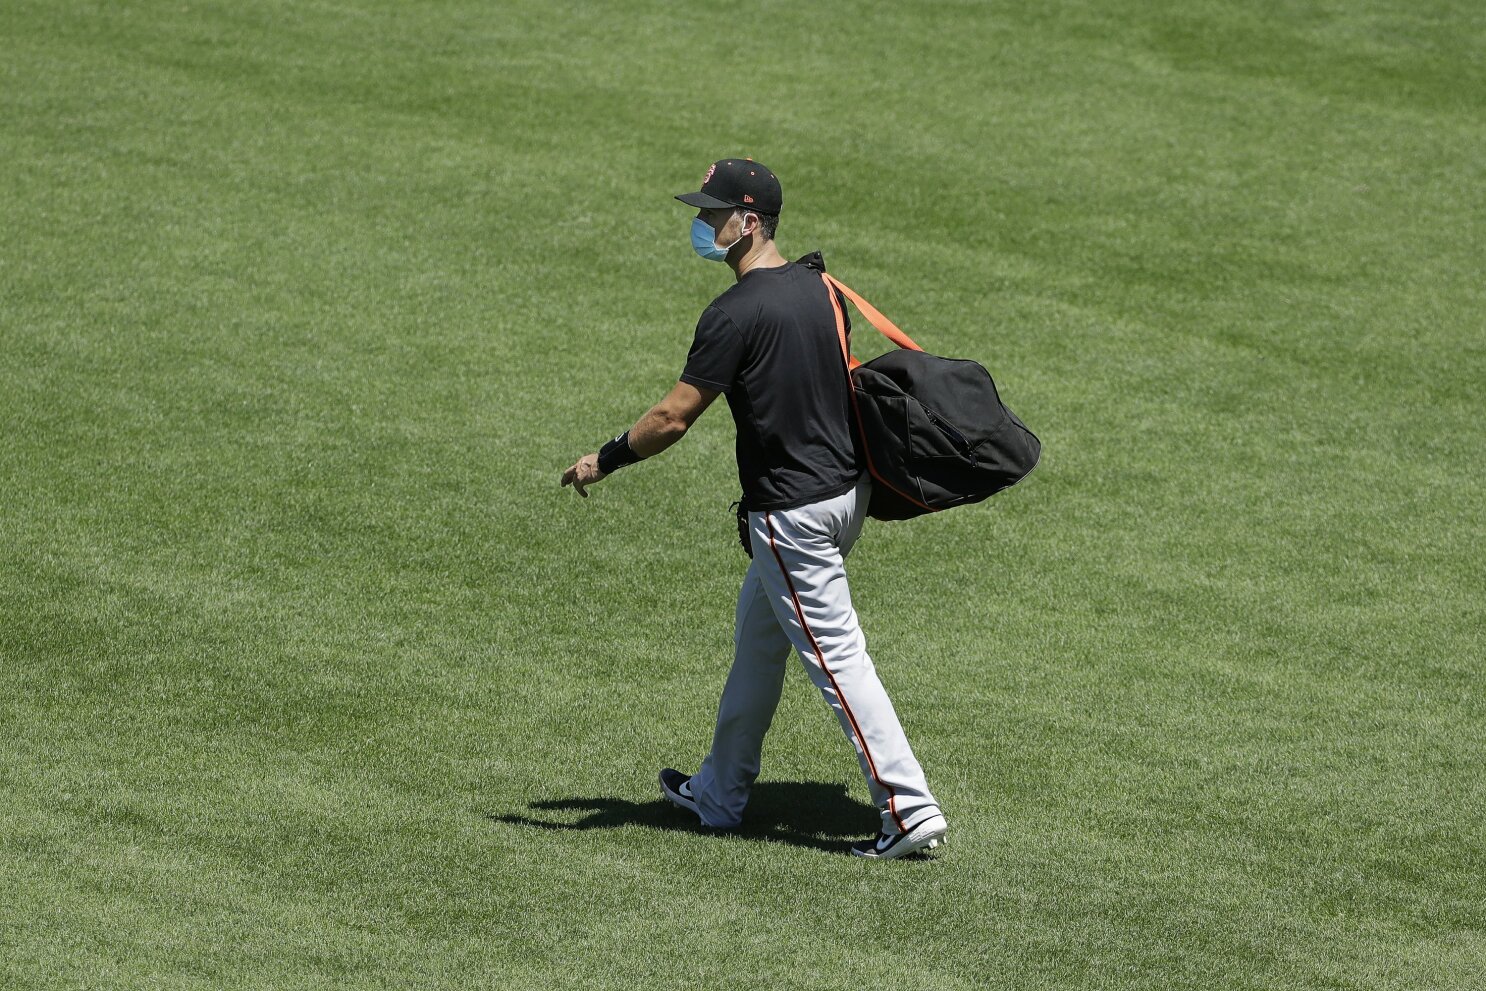 Giants star catcher Posey out this year over virus concerns